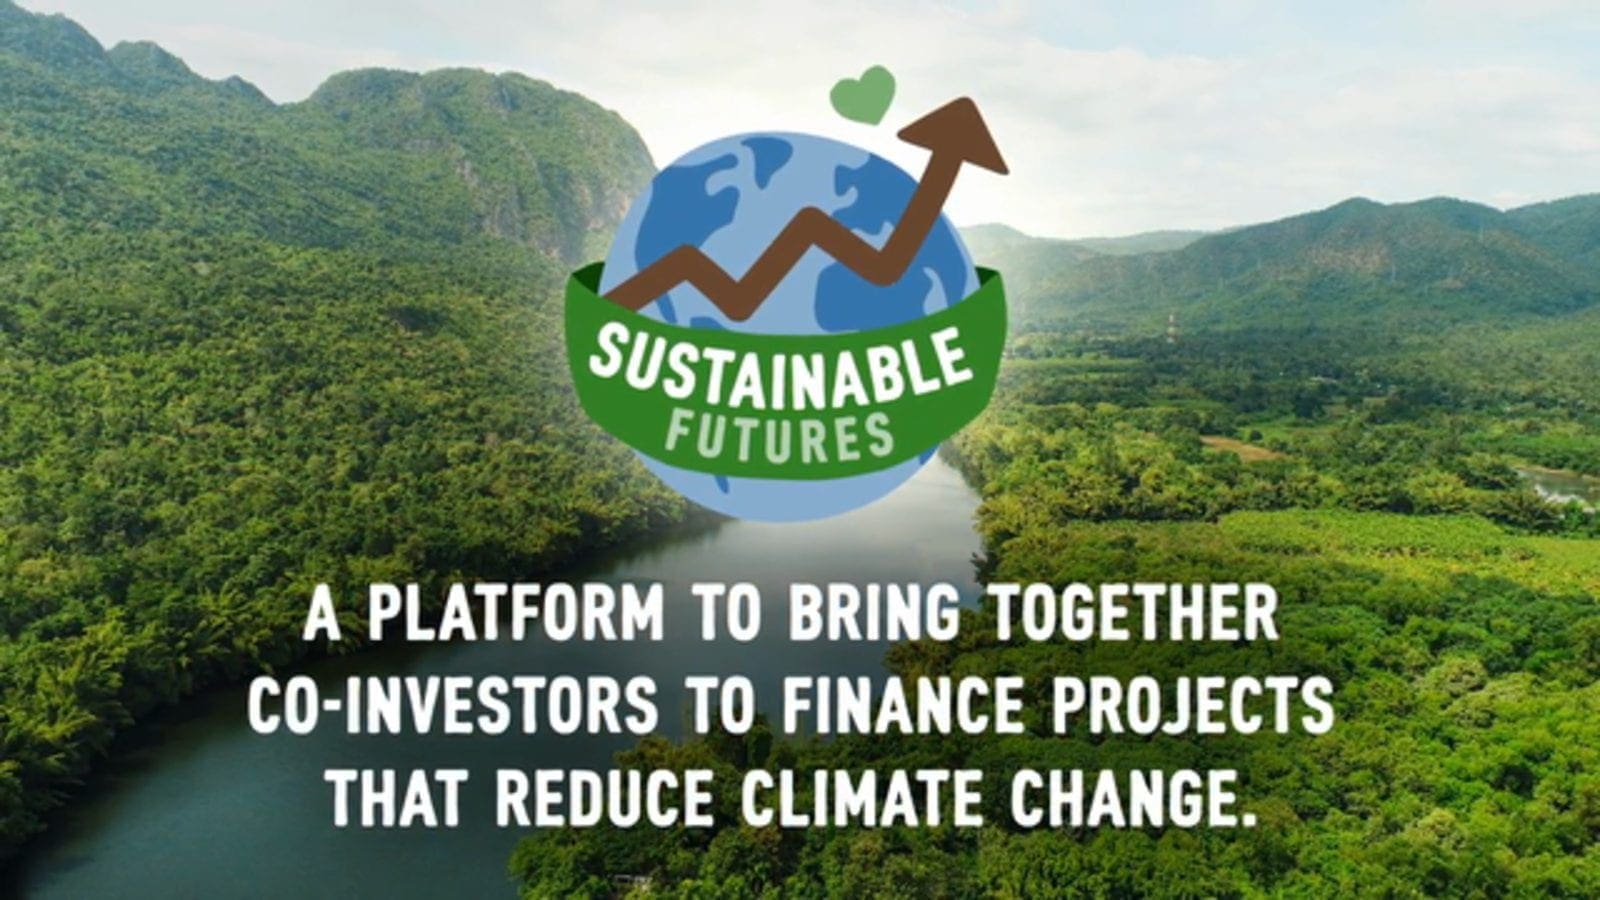 Mondelez contributes towards a better world by investing in ventures tackling sustainability issues